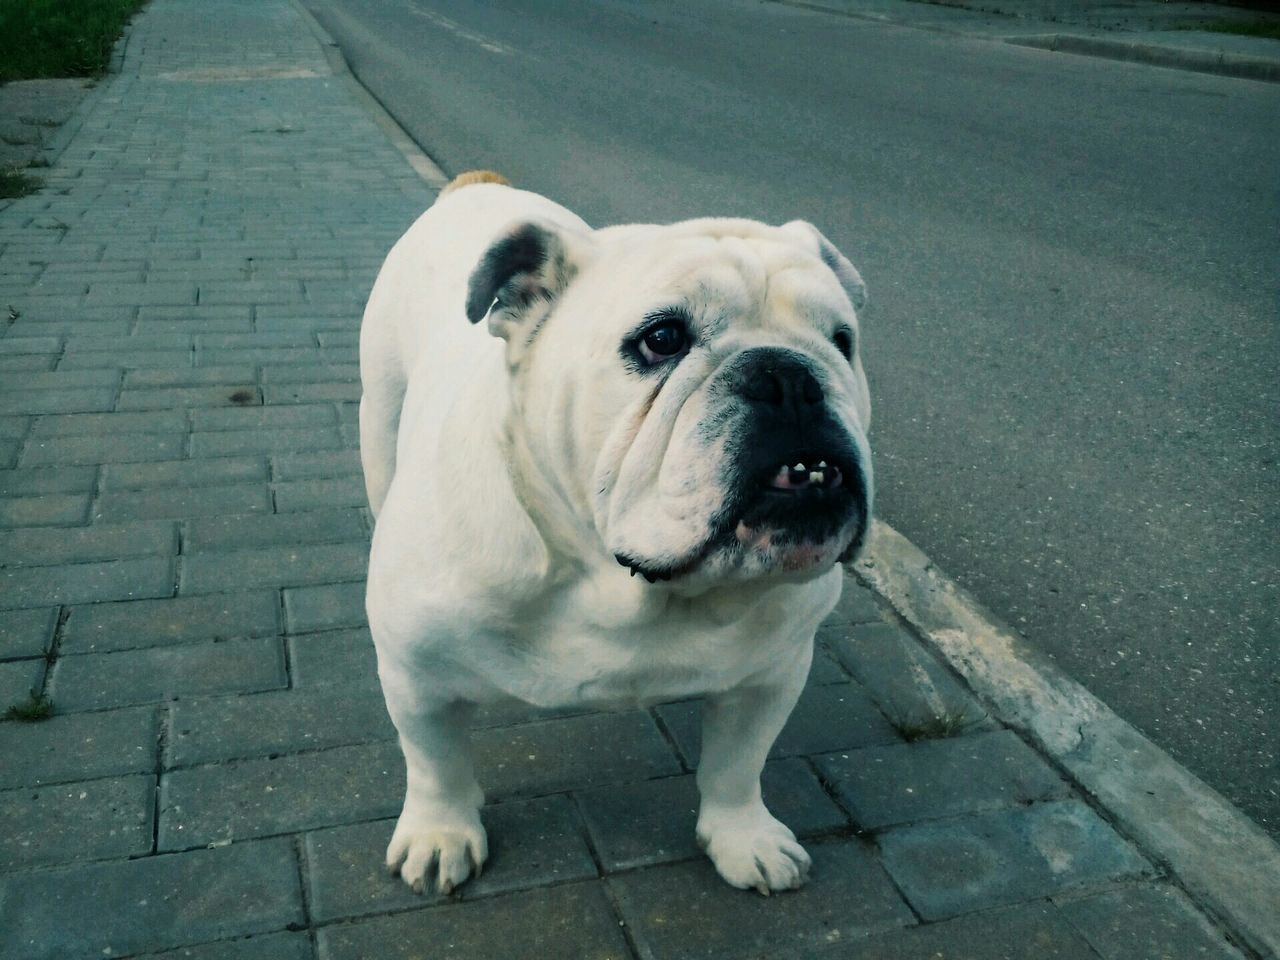 one animal, animal themes, pets, dog, domestic animals, mammal, portrait, high angle view, looking at camera, street, white color, footpath, sidewalk, close-up, animal head, outdoors, cobblestone, sitting, day